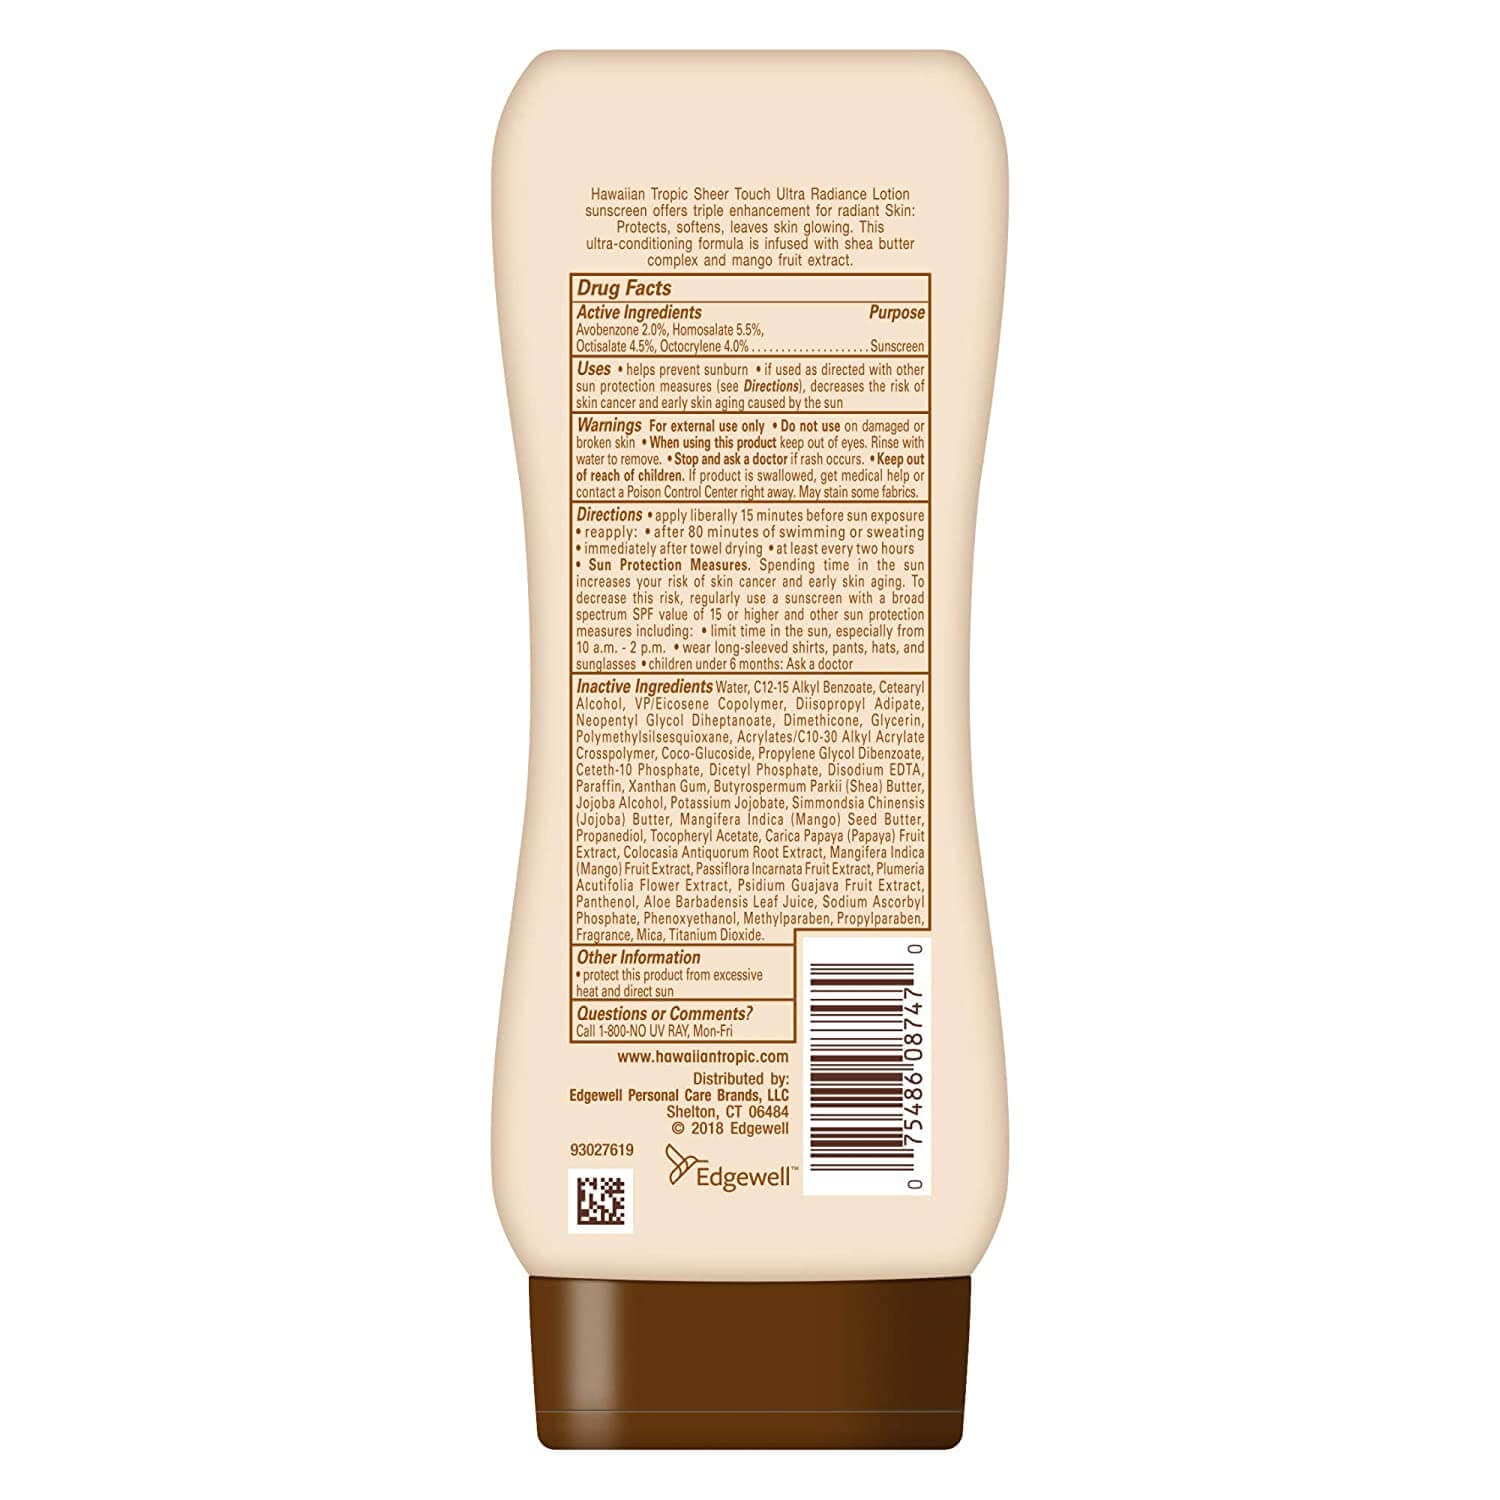 The back of a bottle of Hawaiian Tropic sunscreen, showing its long list of potentially harmful ingredients.